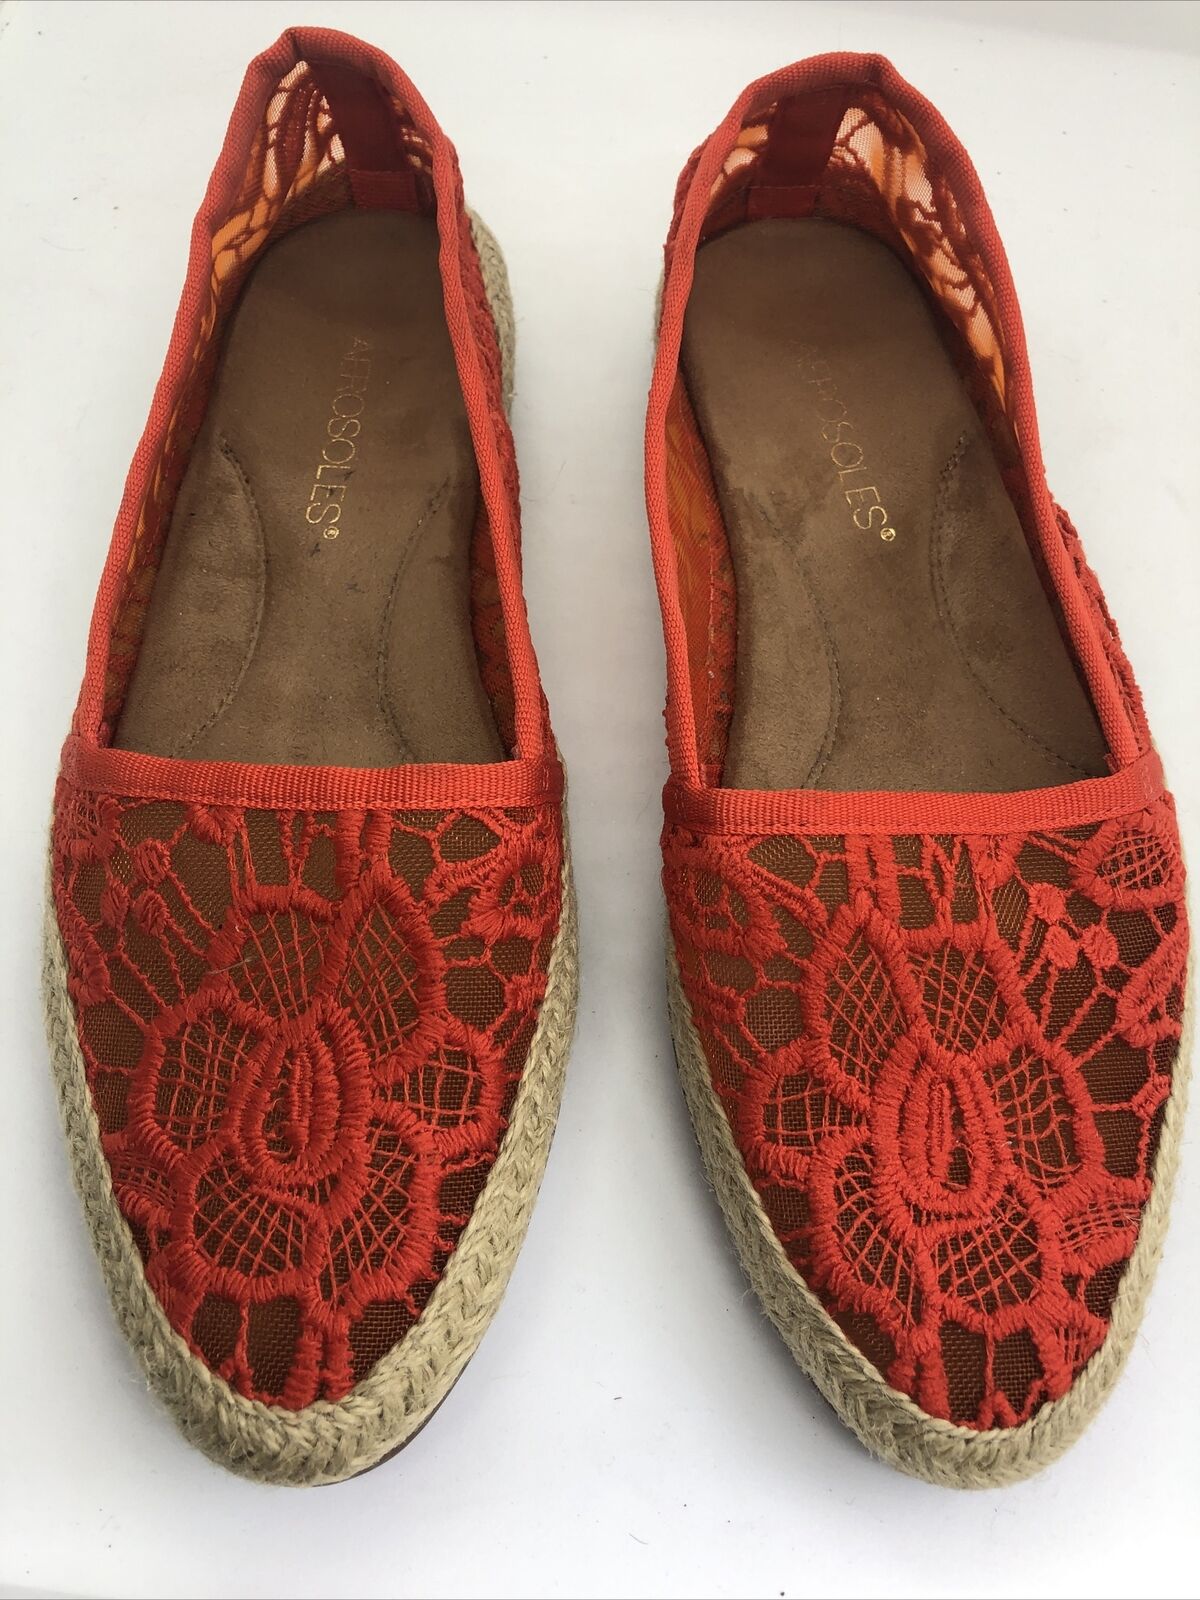 Aerosoles Women's Shoes Trend Report Crochet Red Coral Loafer Espadrilles 7.5